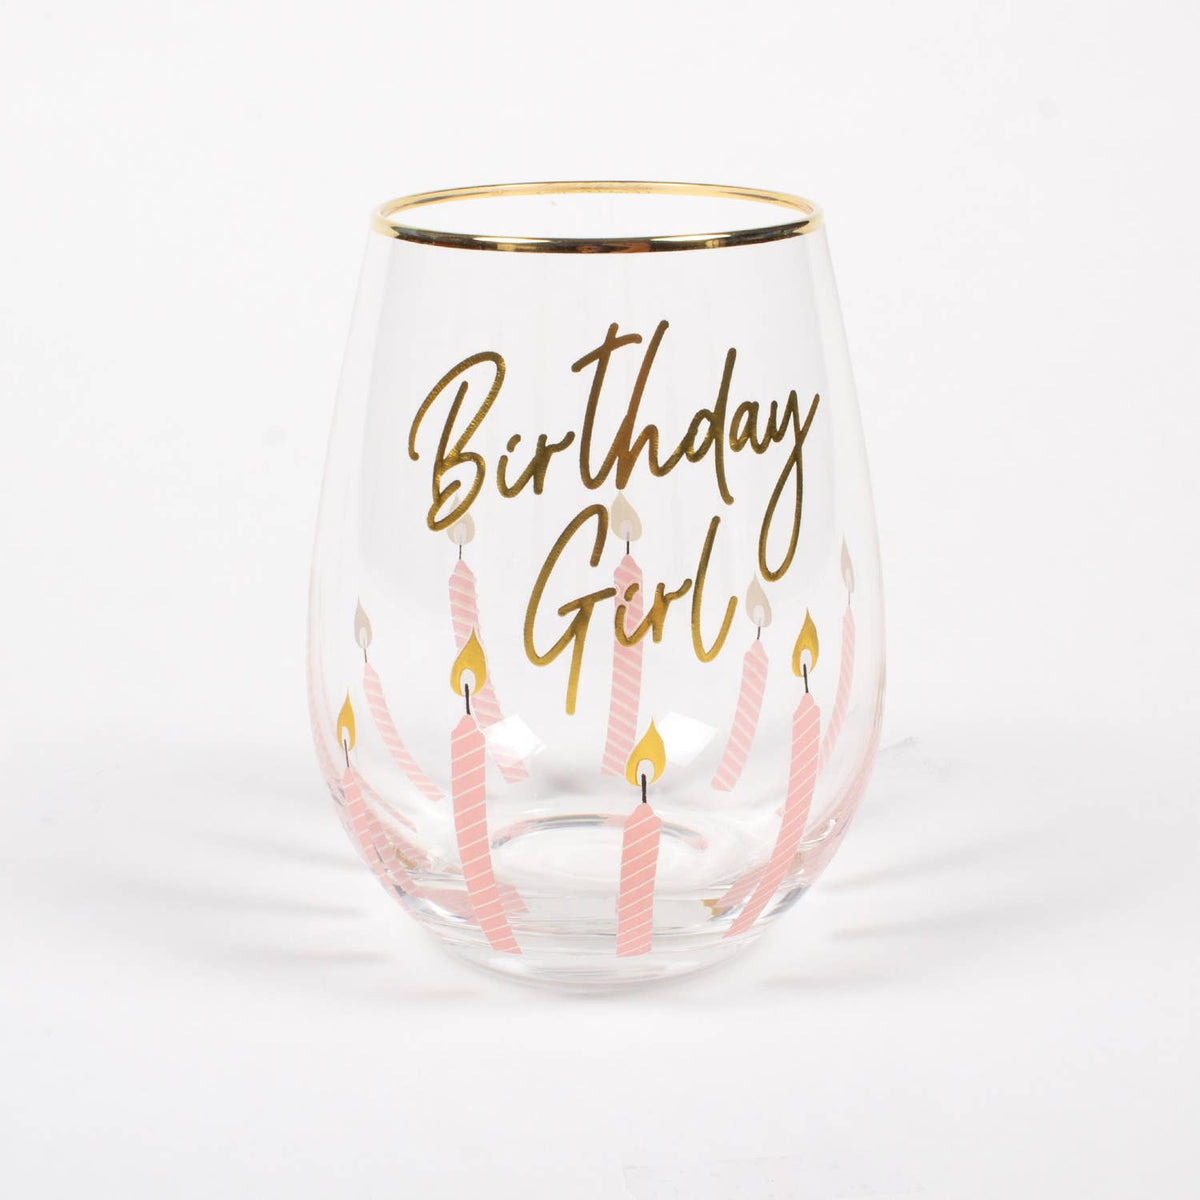 https://www.madmodshop.shop/wp-content/uploads/1700/21/we-will-discover-the-8-oak-lane-birthday-girl-stemless-wine-glass-8-oak-lane-online-stores-you-need-you-by-utilizing-our-knowledgeable-staff_0.jpg